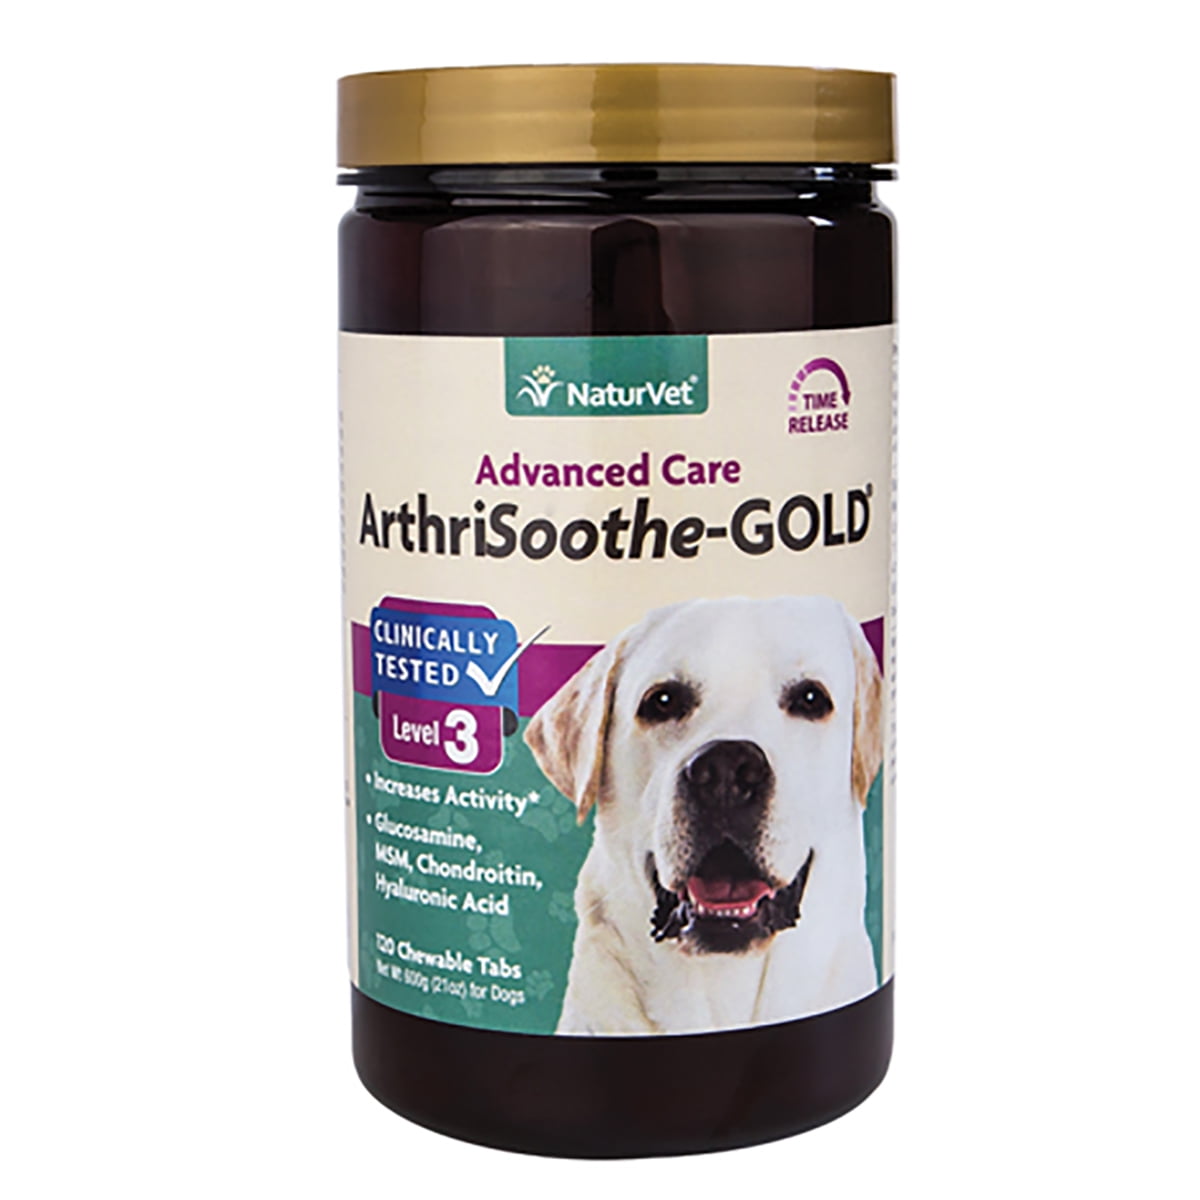 NaturVet ArthriSootheGOLD Level 3, MSM and Glucosamine for Dogs and